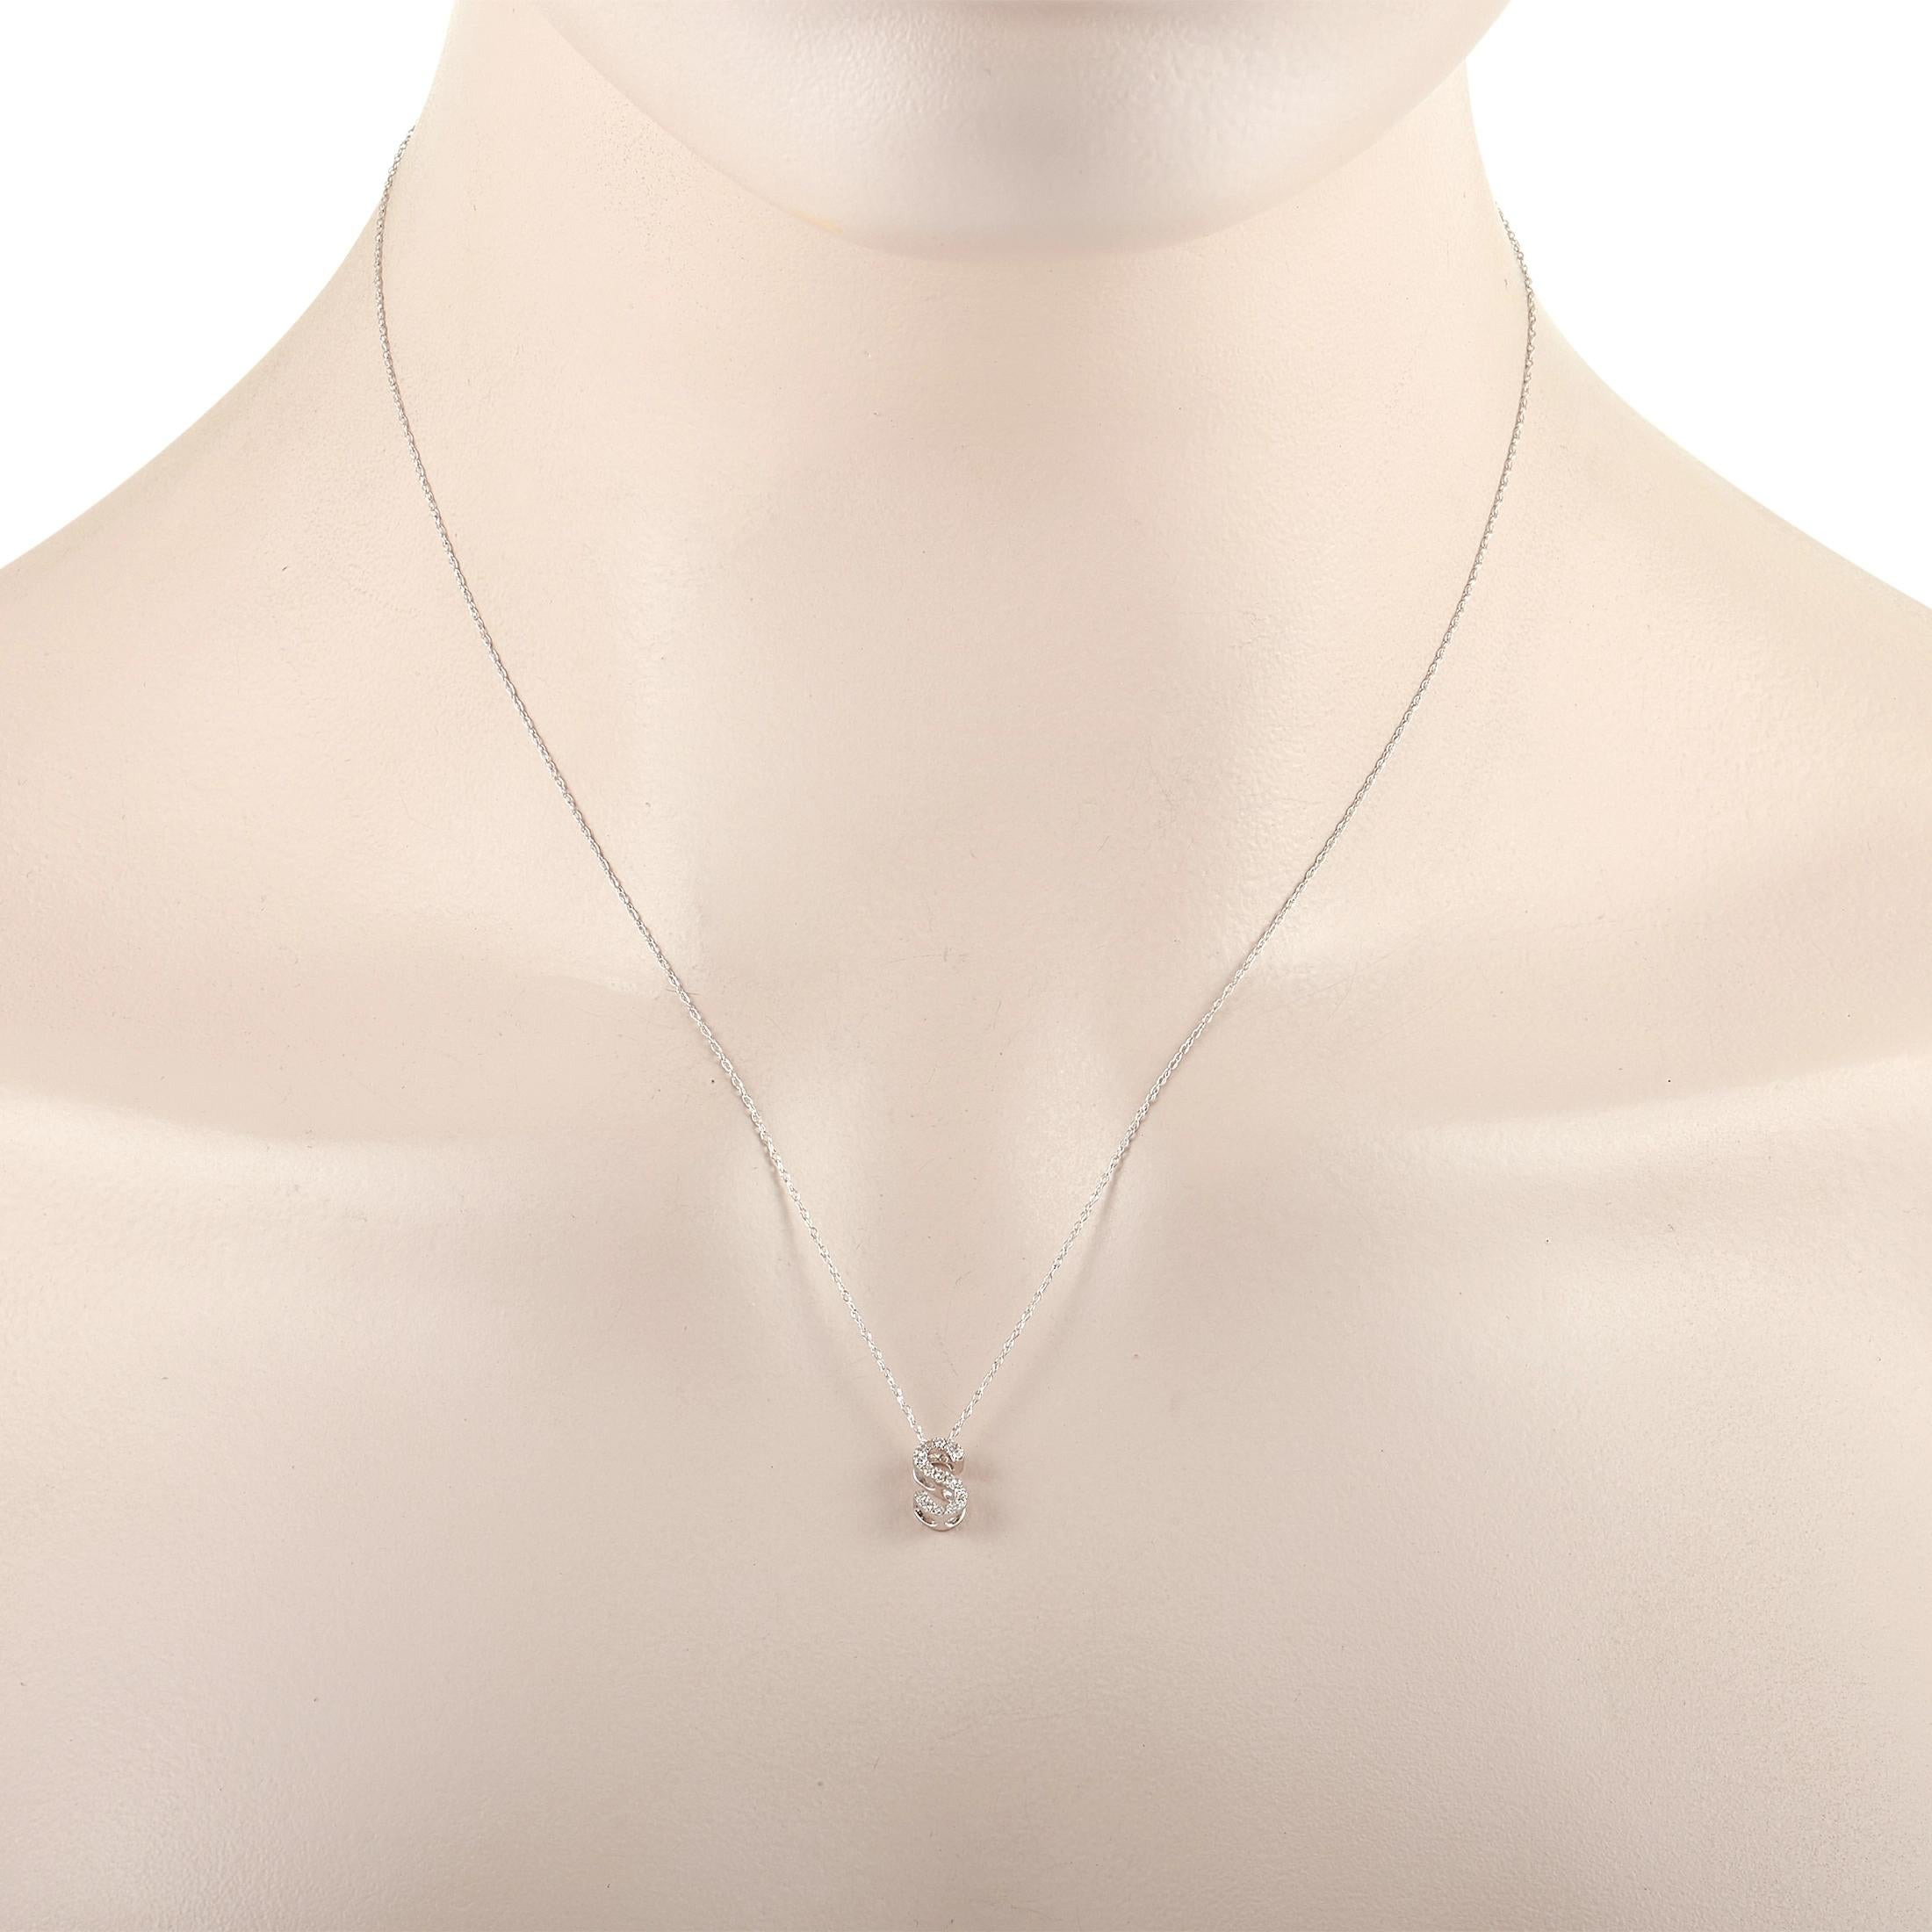 This pretty LB Exclusive 14K White Gold 0.10 ct Diamond Initial ‘S’ Necklace is made with a delicate 14K white gold chain and features a small white gold pendant shaped like the letter ‘S’ and set with 0.10 carats of round diamonds throughout. The